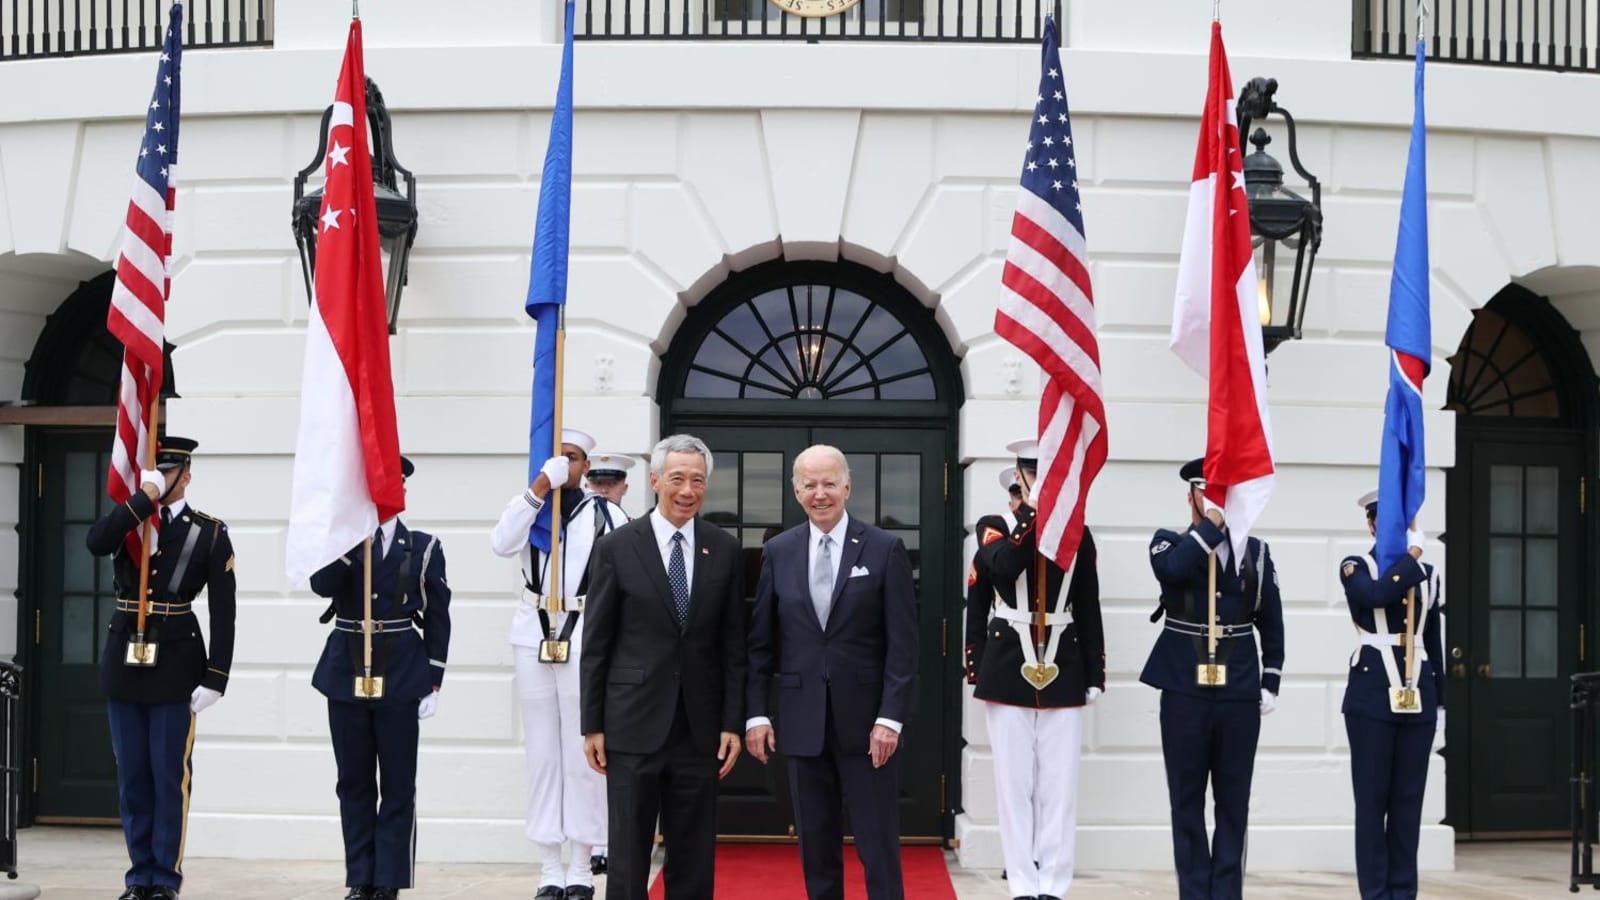 singapore-welcomes-proposed-indo-pacific-economic-framework-with-us:-pm-lee